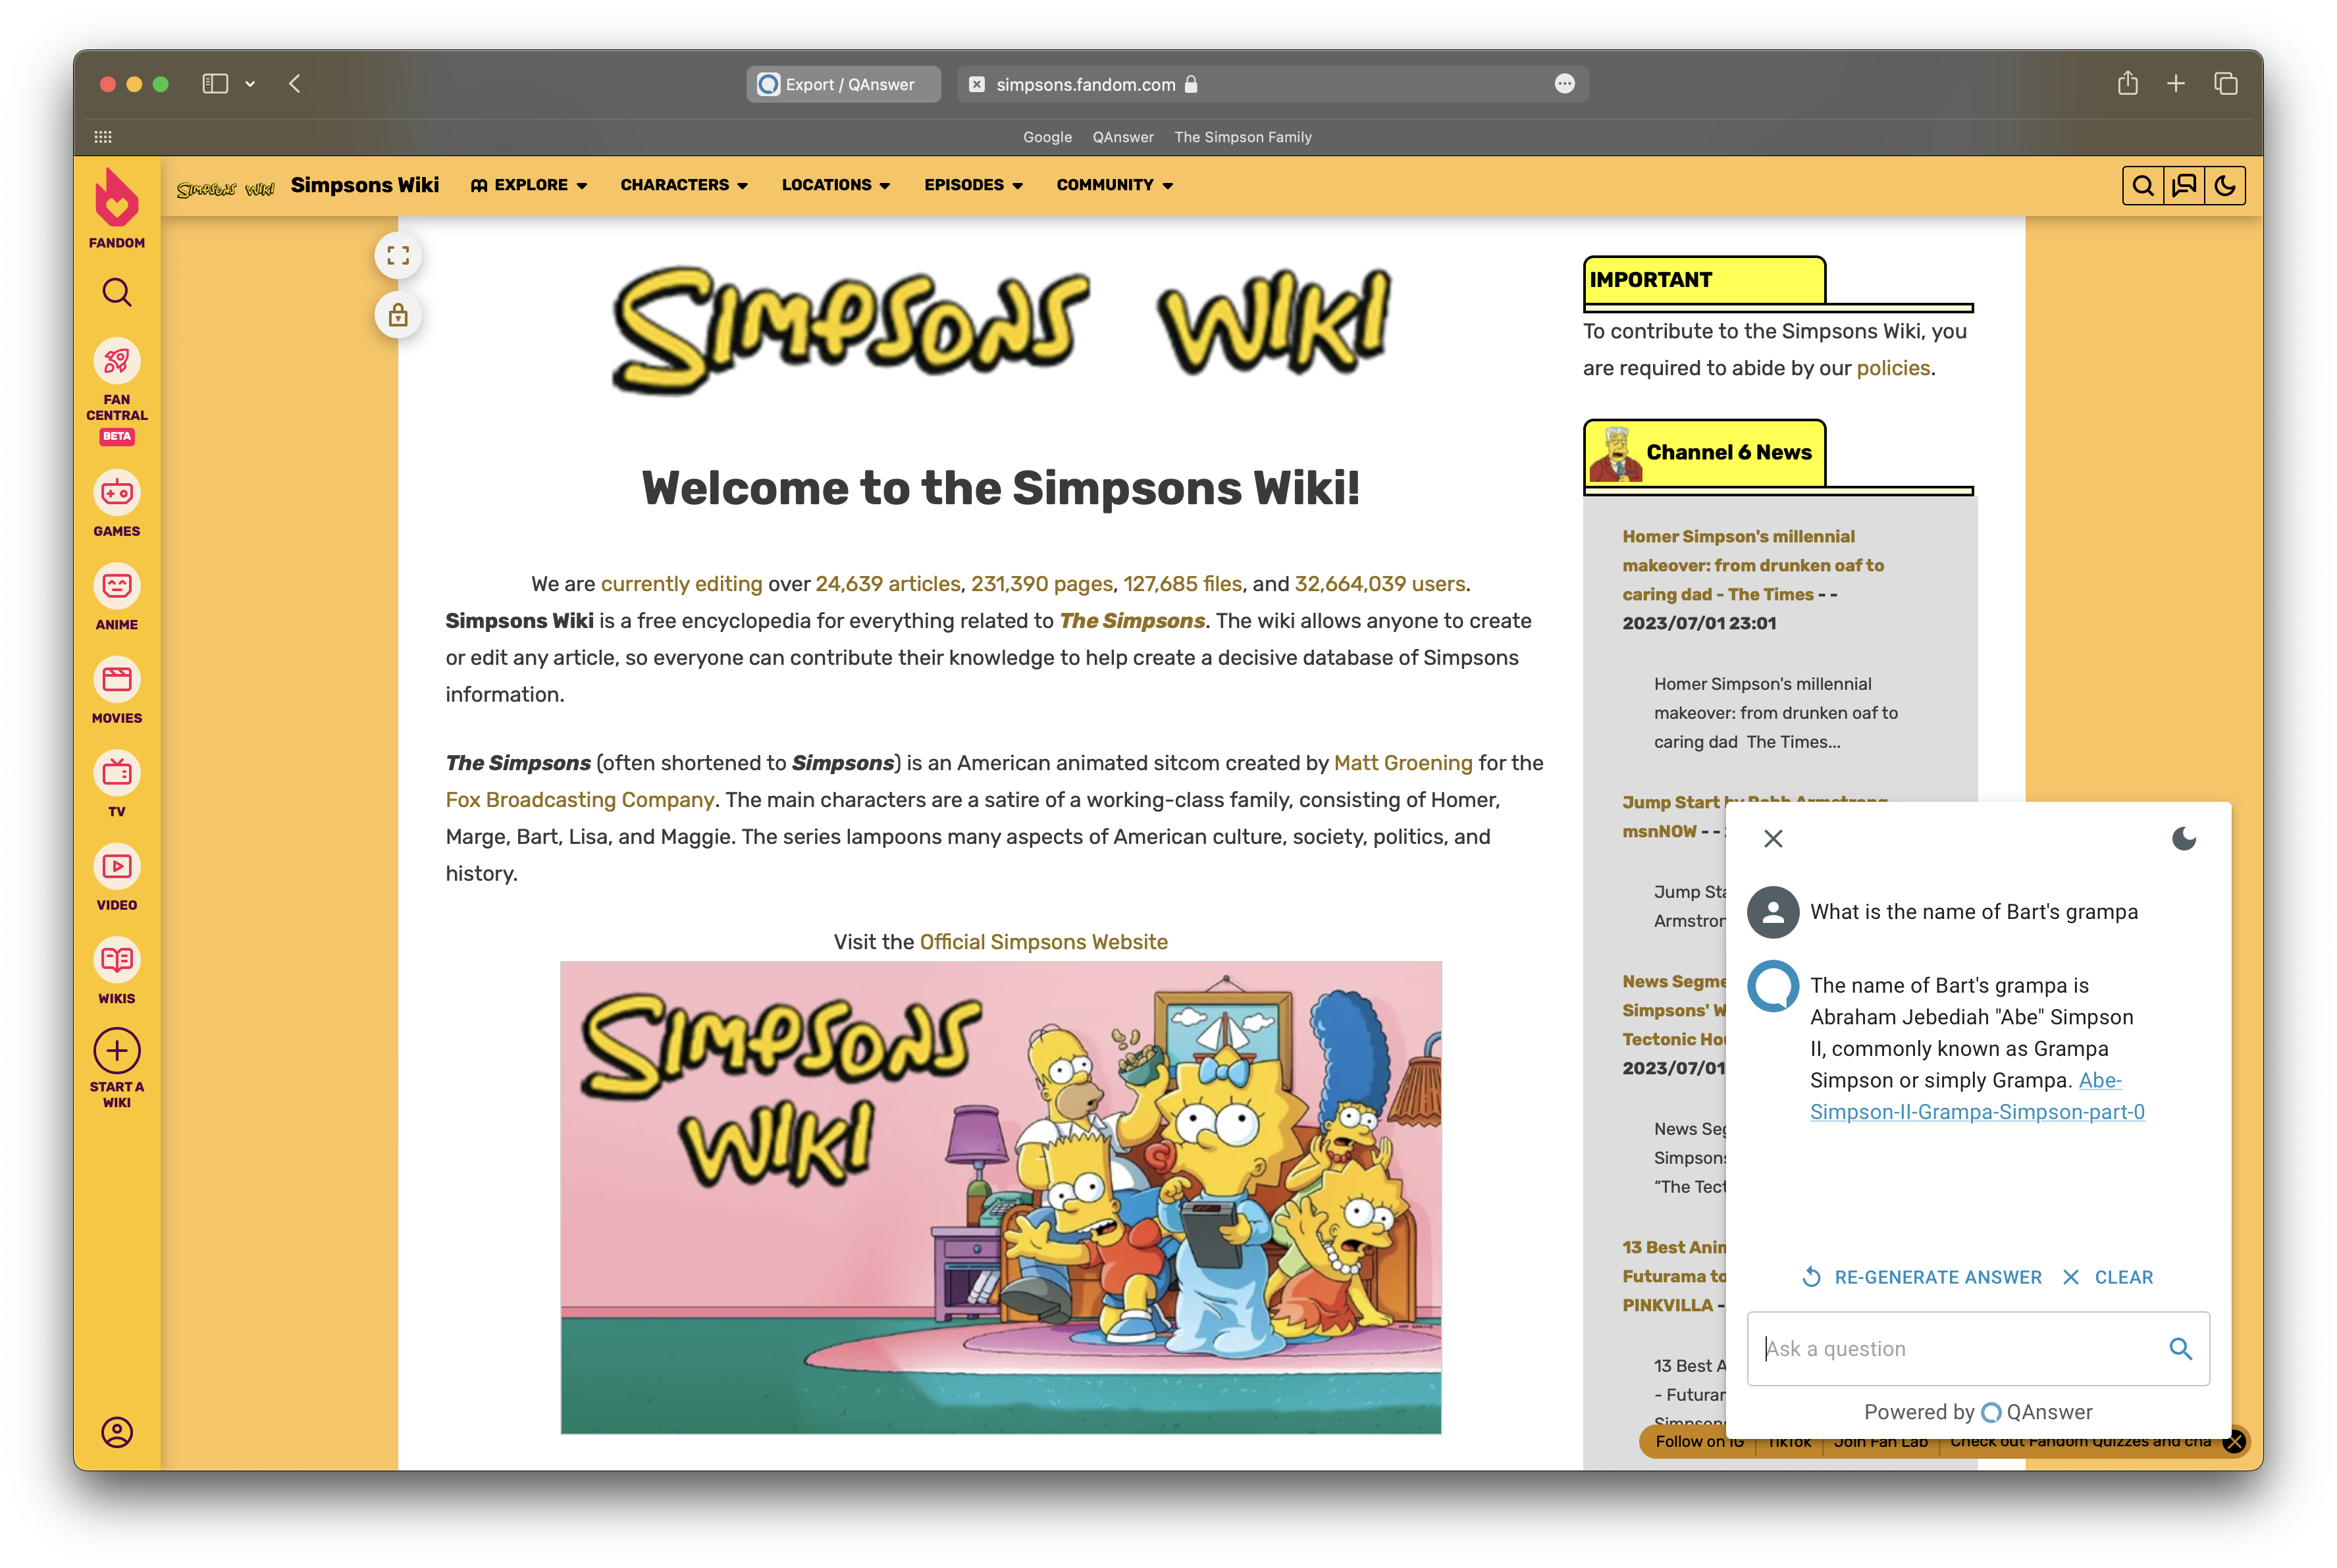 Use the widget while browsing on the simpsons wiki